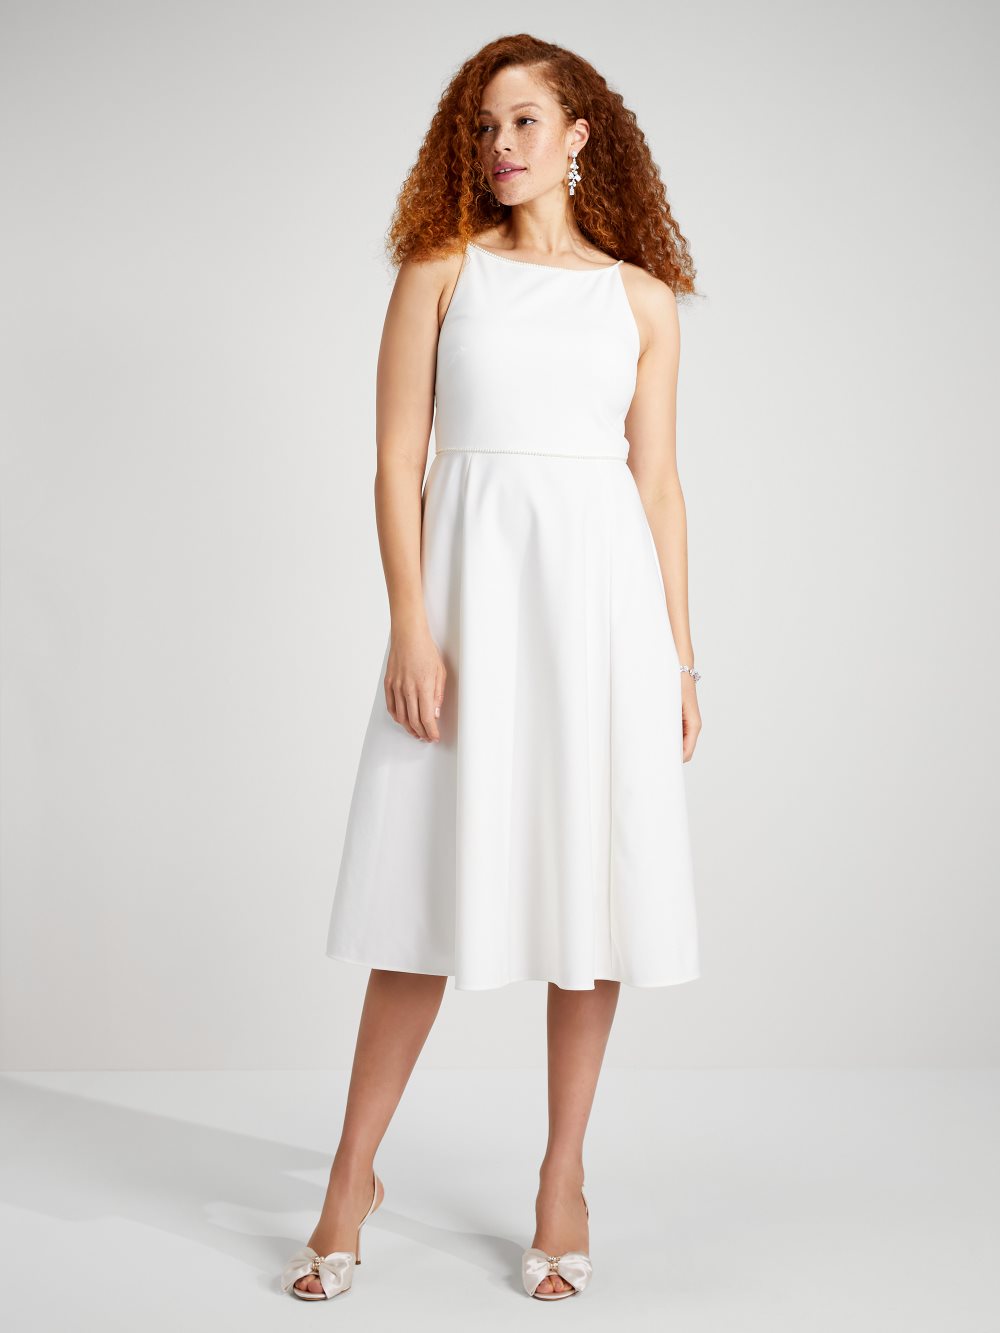 Women's french cream pearl golightly dress | Kate Spade